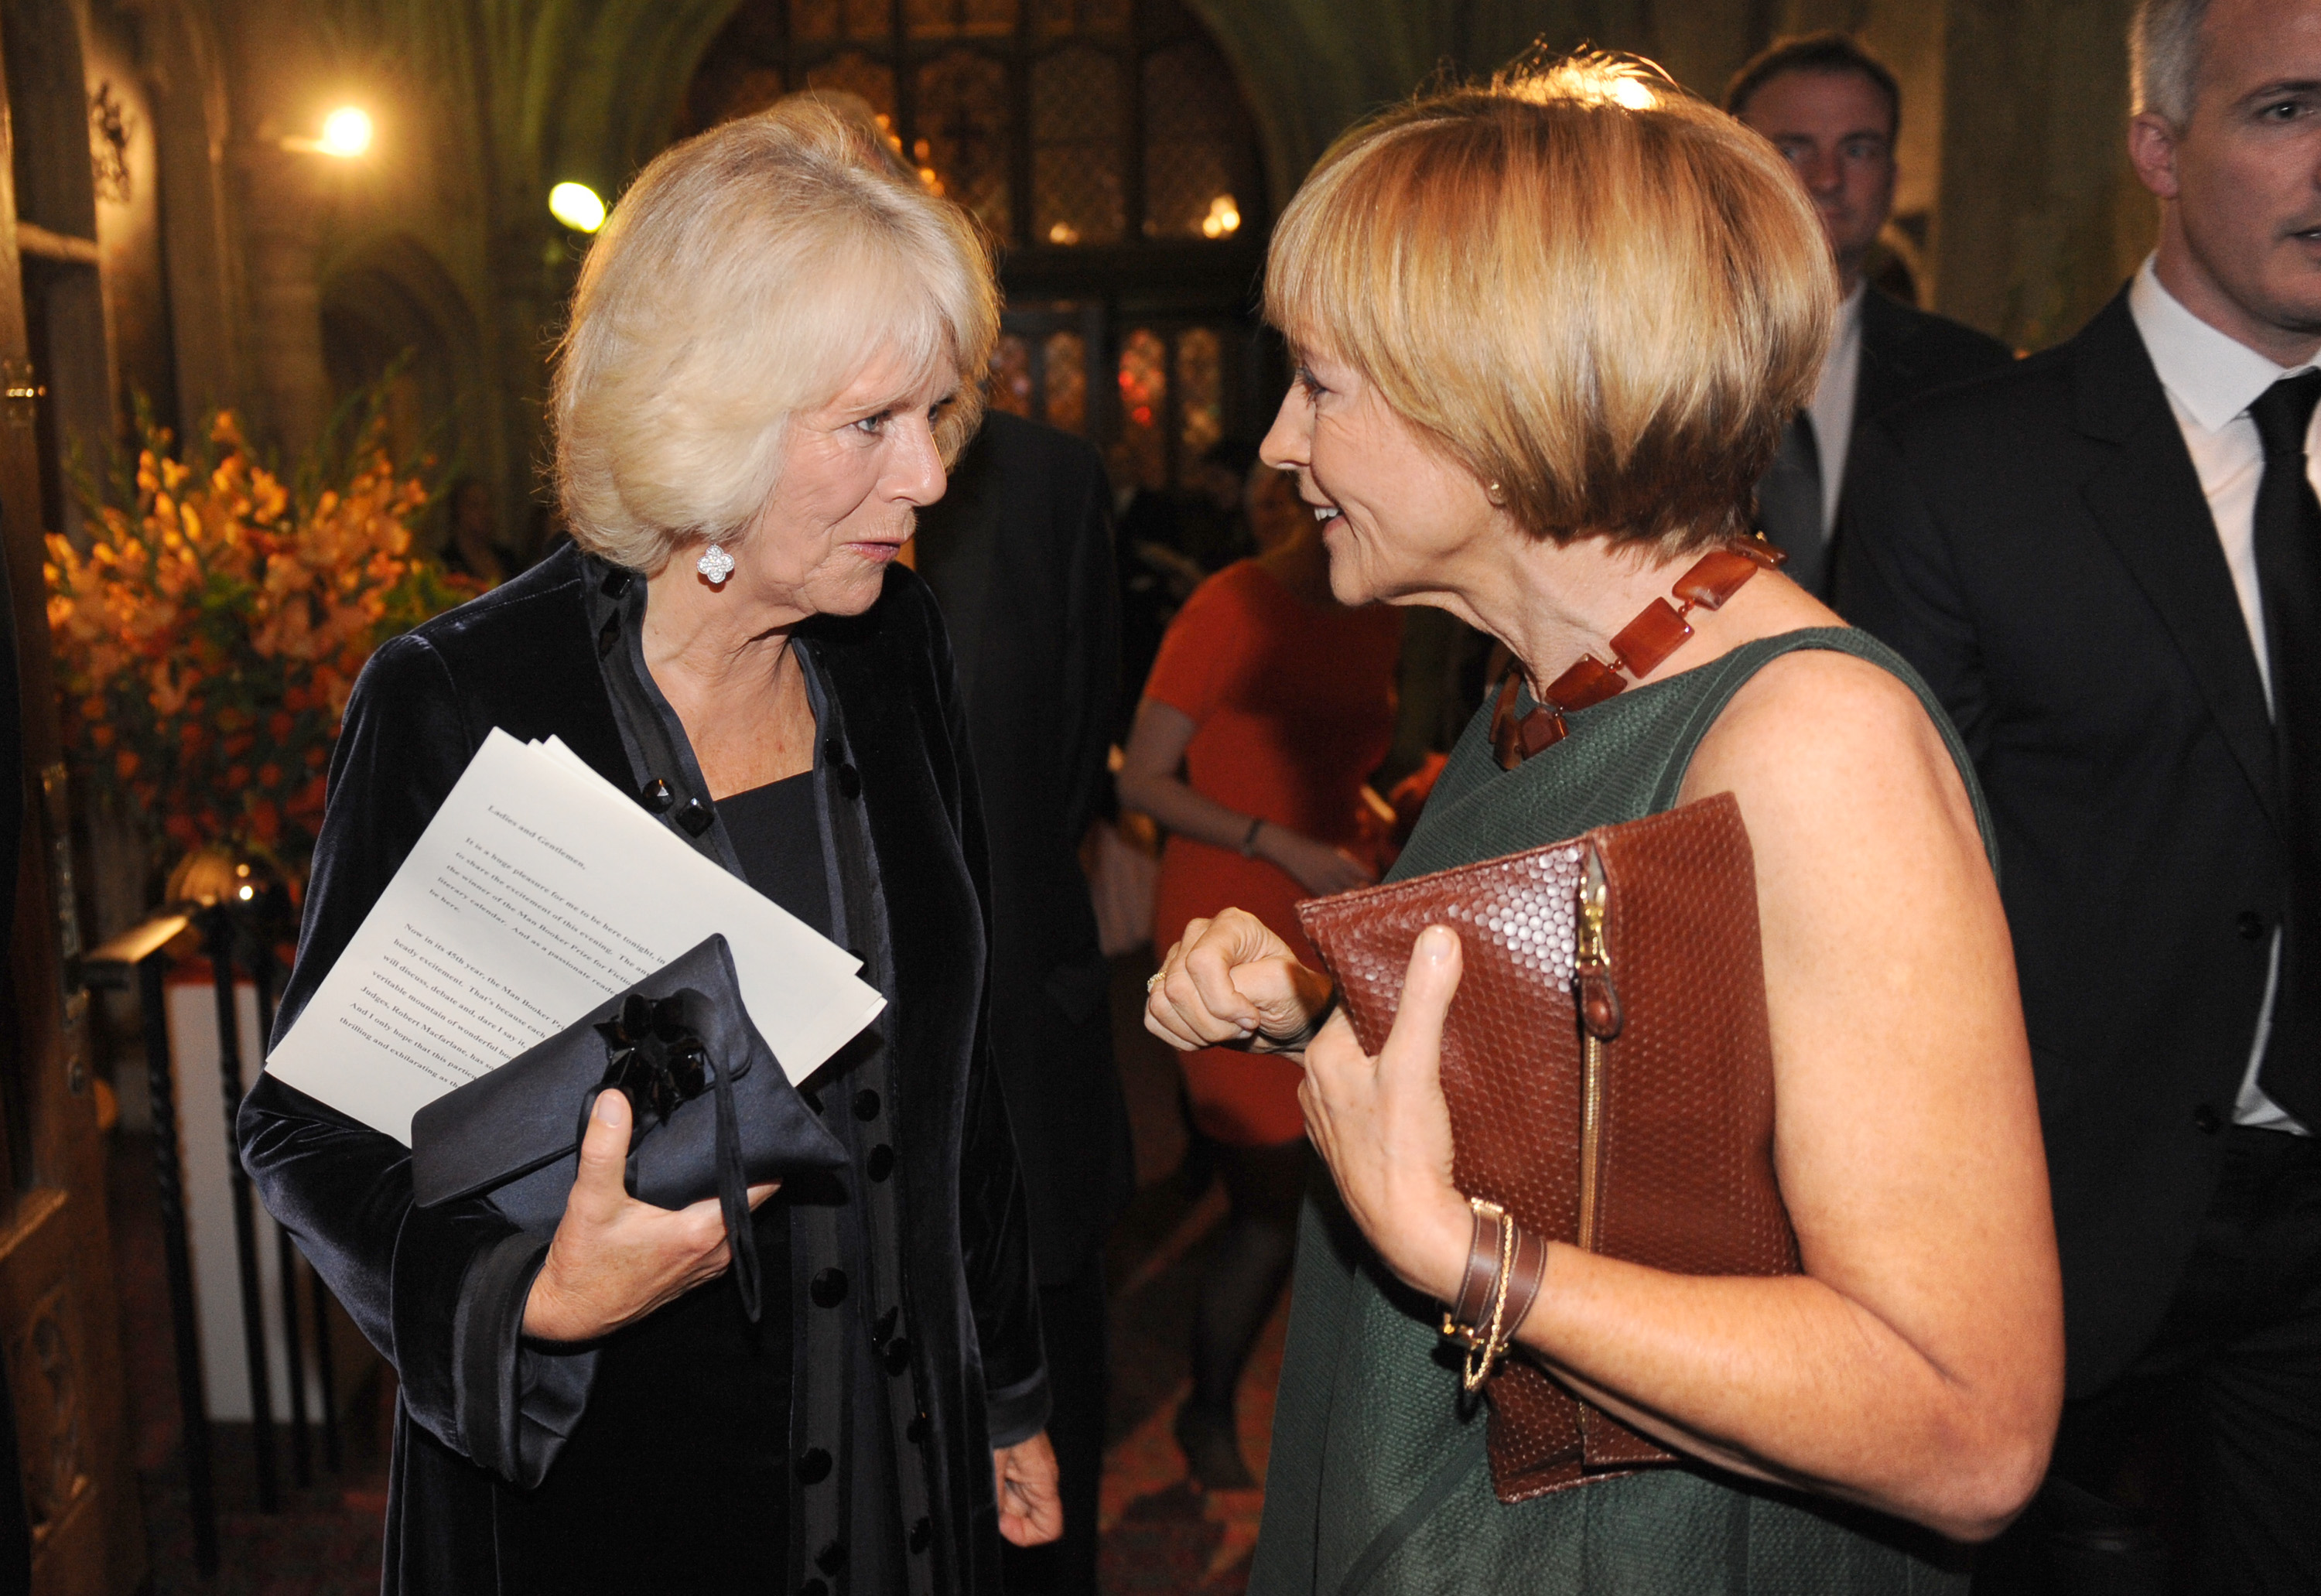 Camilla met Robinson at the 2013 Man Booker Prize for Fiction reception